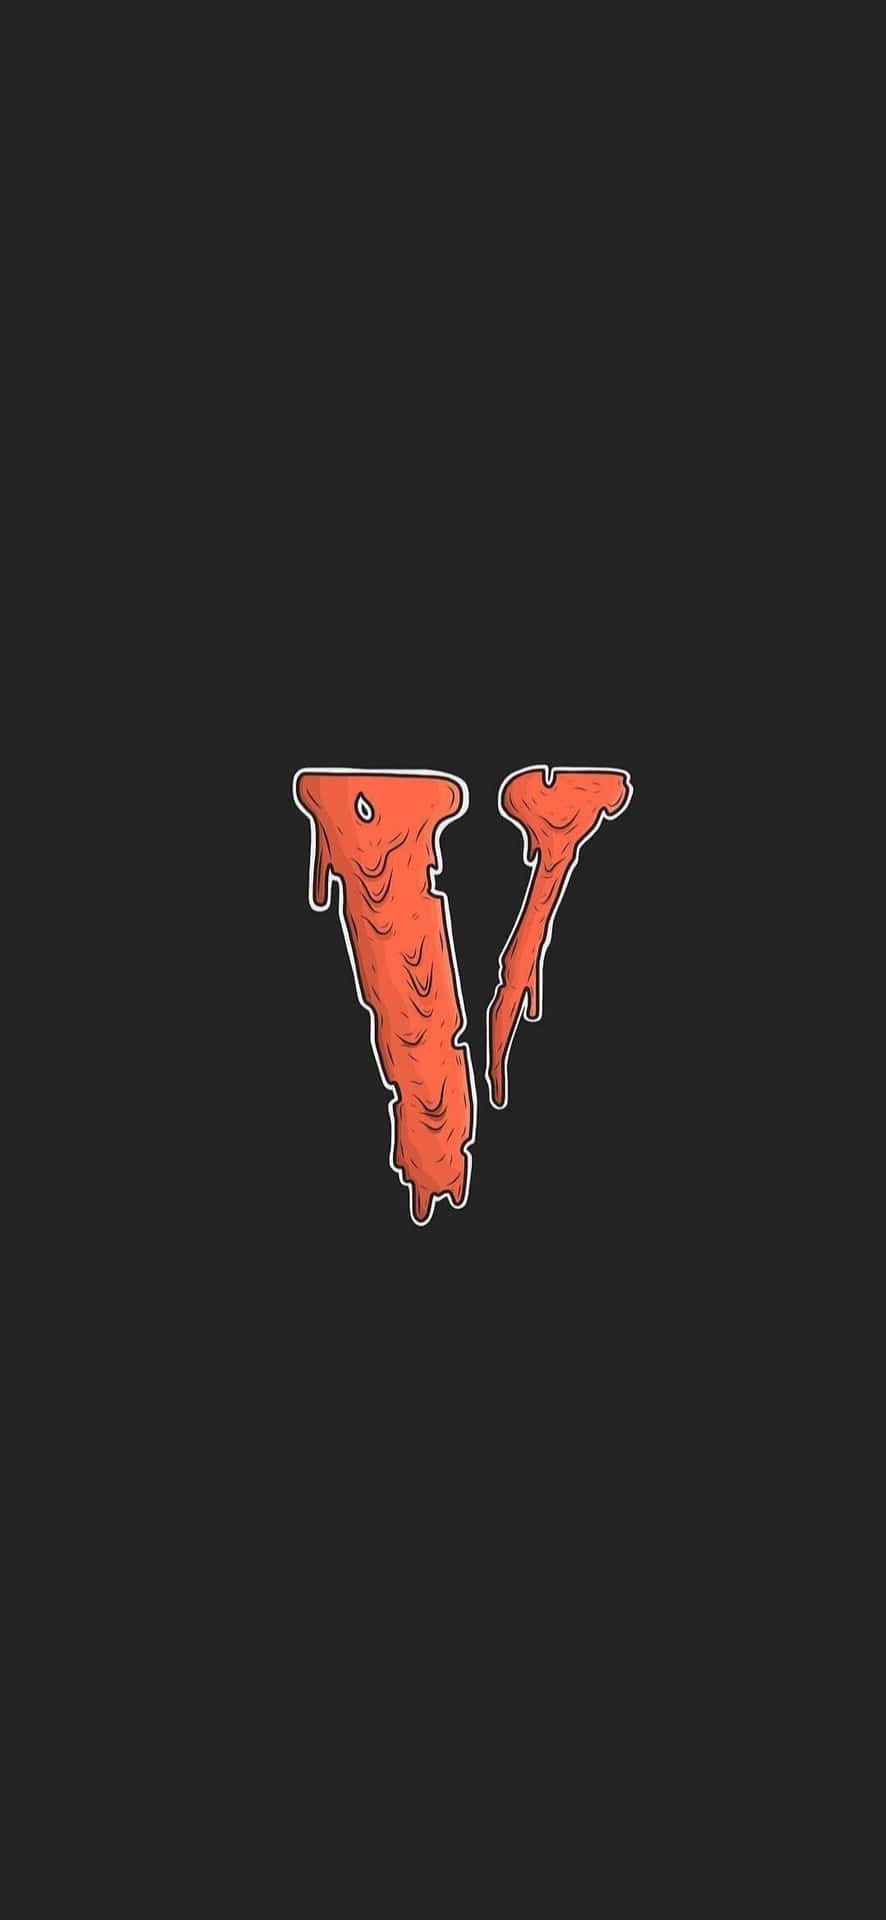 Up your style game with the Vlone Iphone Wallpaper